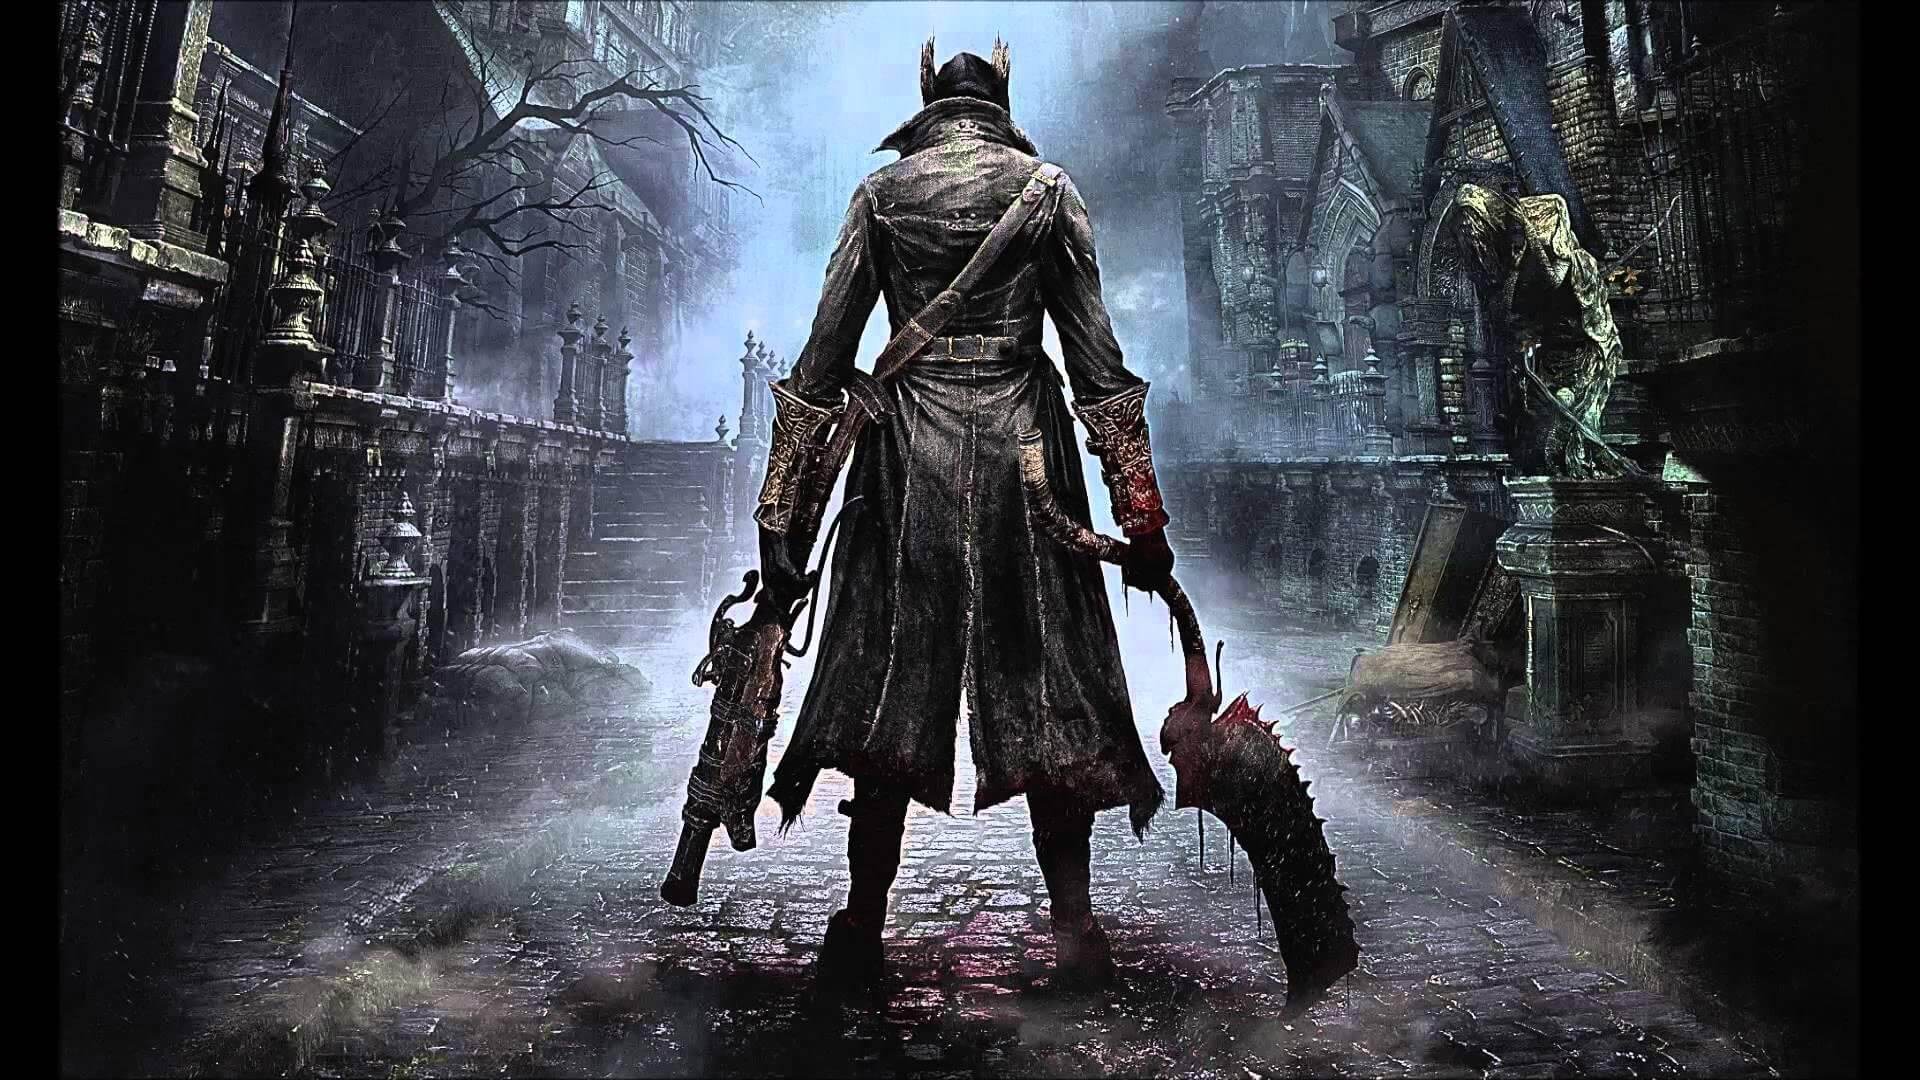 For the first time ever, a PS4 emulator can boot Bloodborne